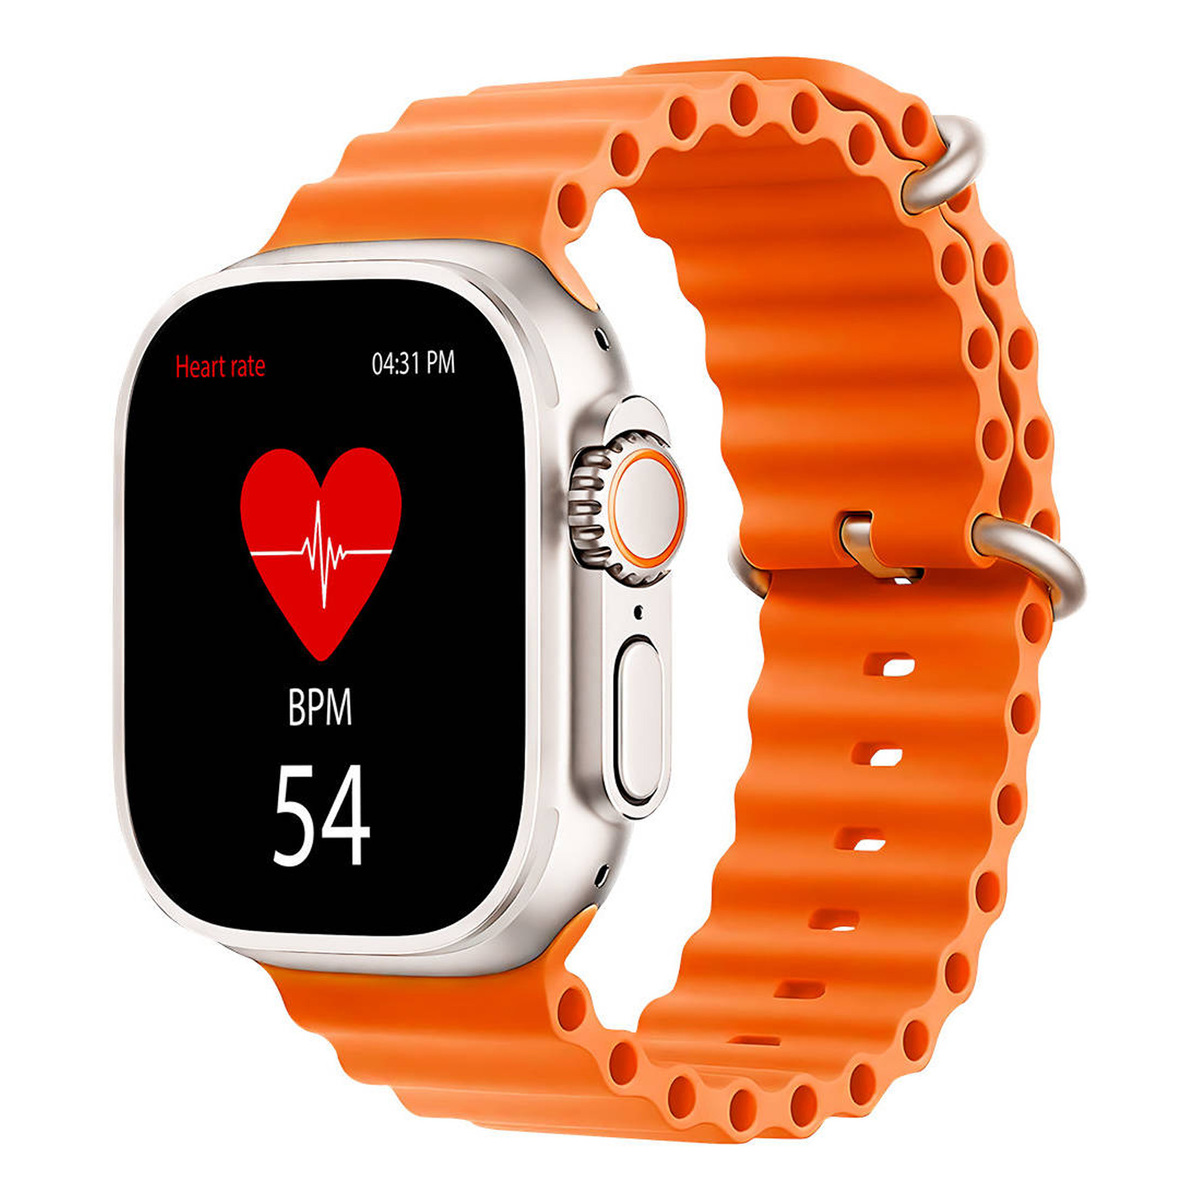 Touchmate Smartwatch, 1.83" Full-Touch IPS Display, Sports Mode, Activity Tracker, Sleep Monitor, Heartrate & Blood Pressure Sensor, Blood Oxygen Meter, 190mAh Battery, Orange-TM-SW450NO